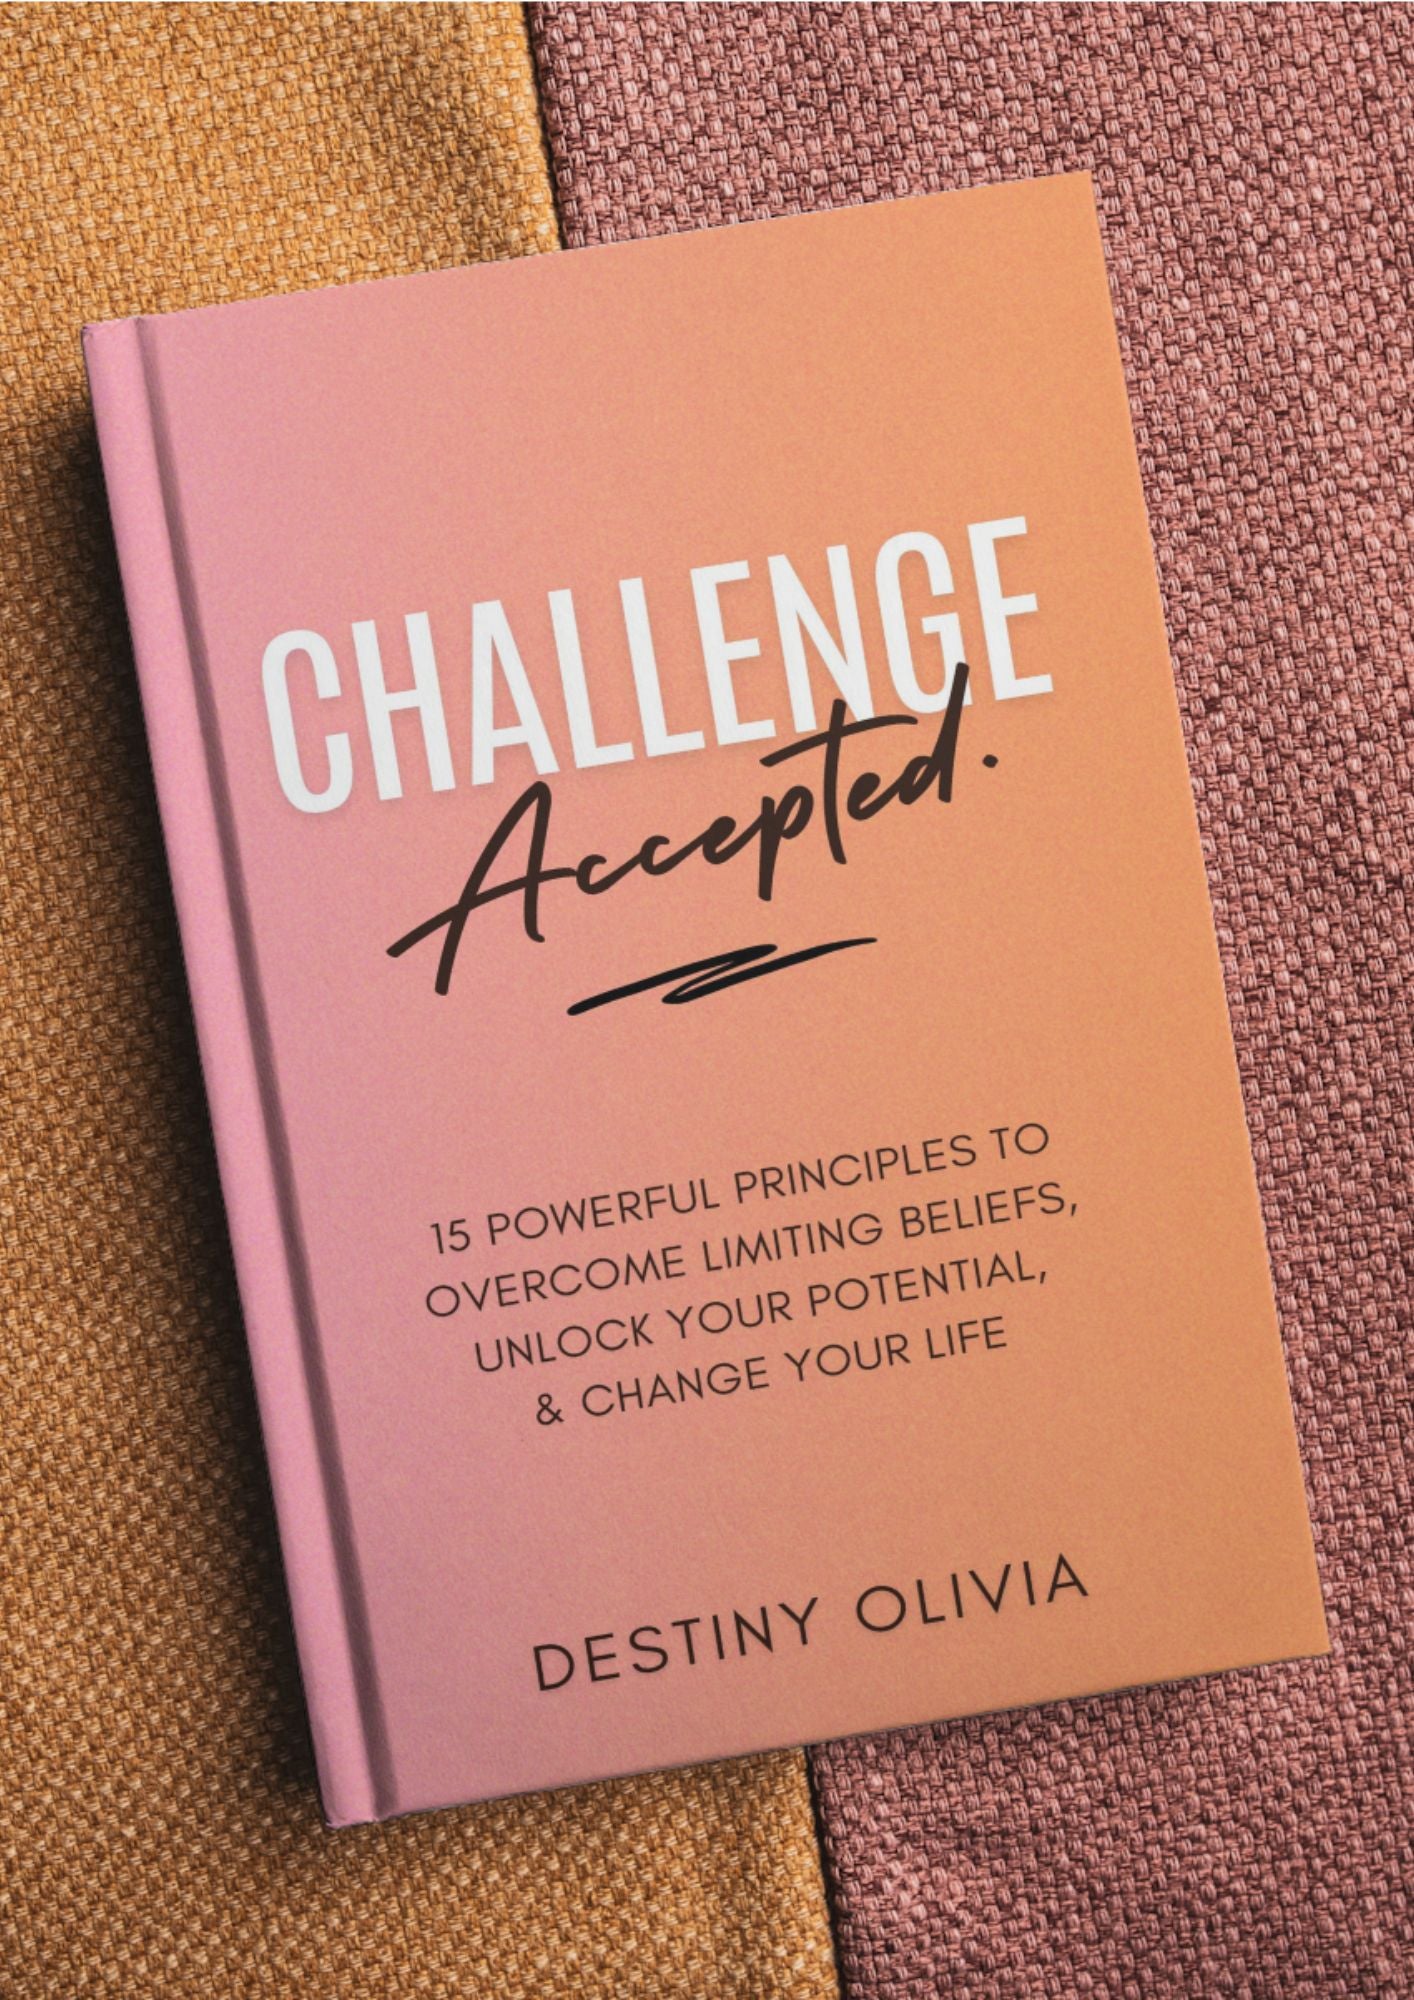 Challenge Accepted: 15 Powerful Principles to Overcome Limiting Beliefs, Unlock Your Potential, & Change Your Life